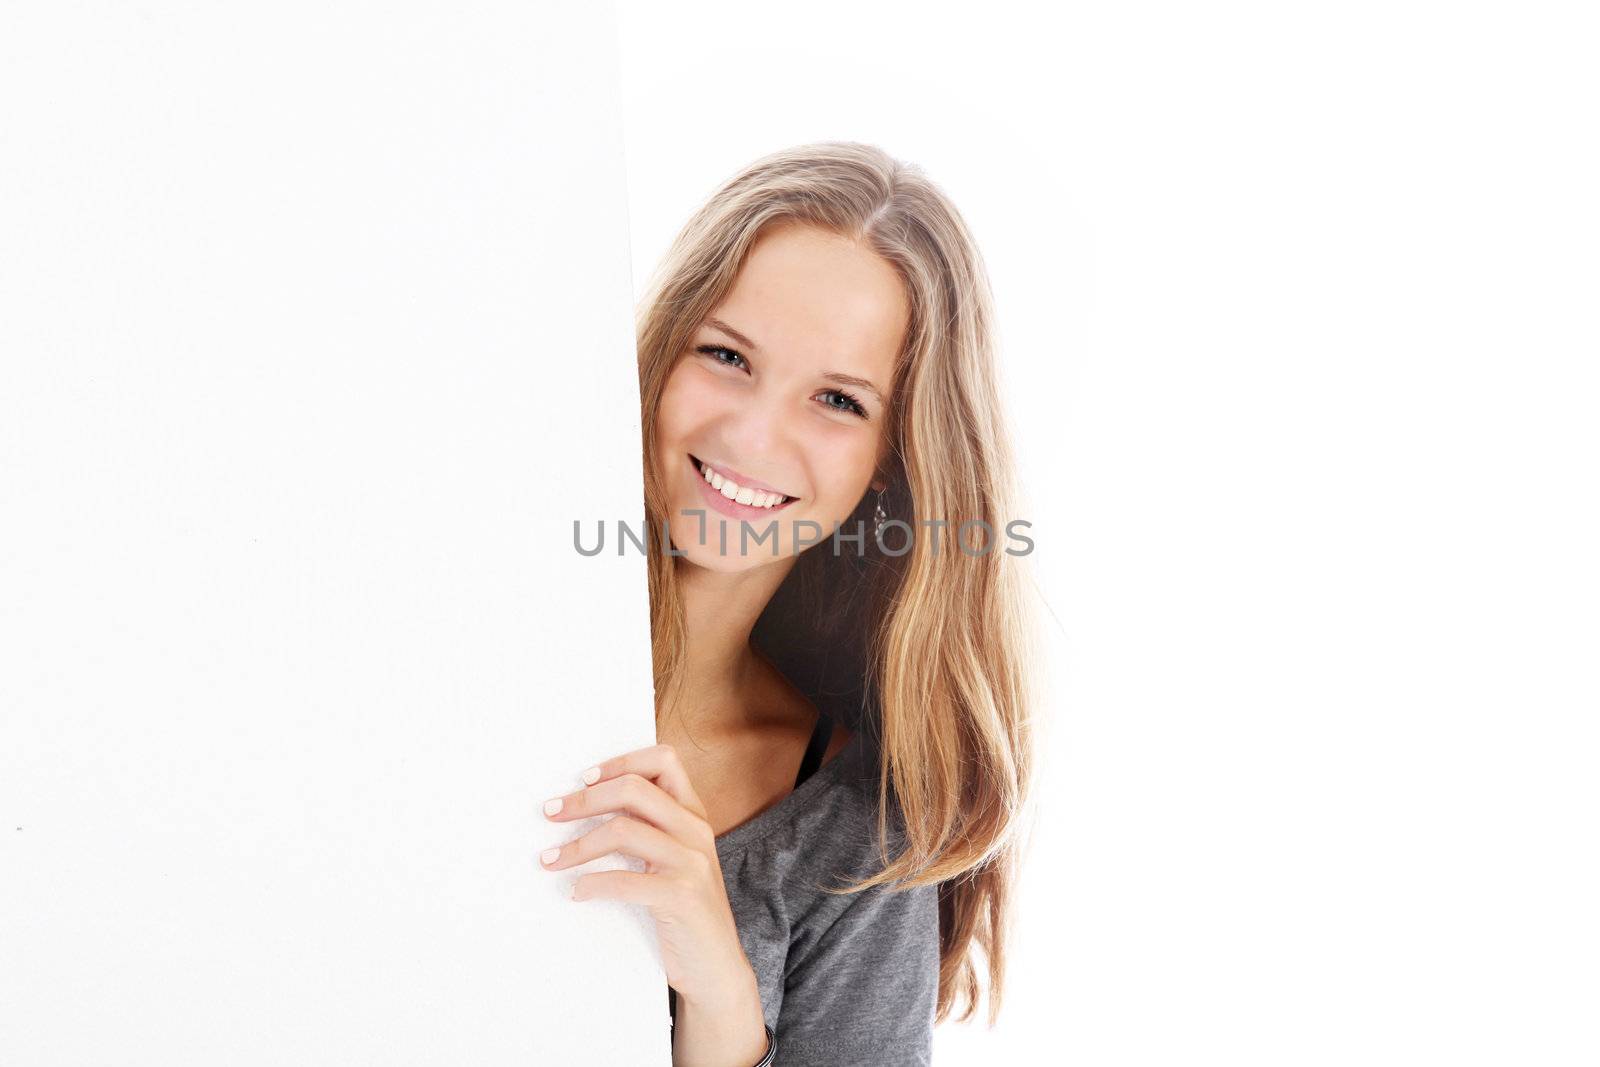 Smiling pretty young teenager standing alongside a blank white board for your text and advertising 